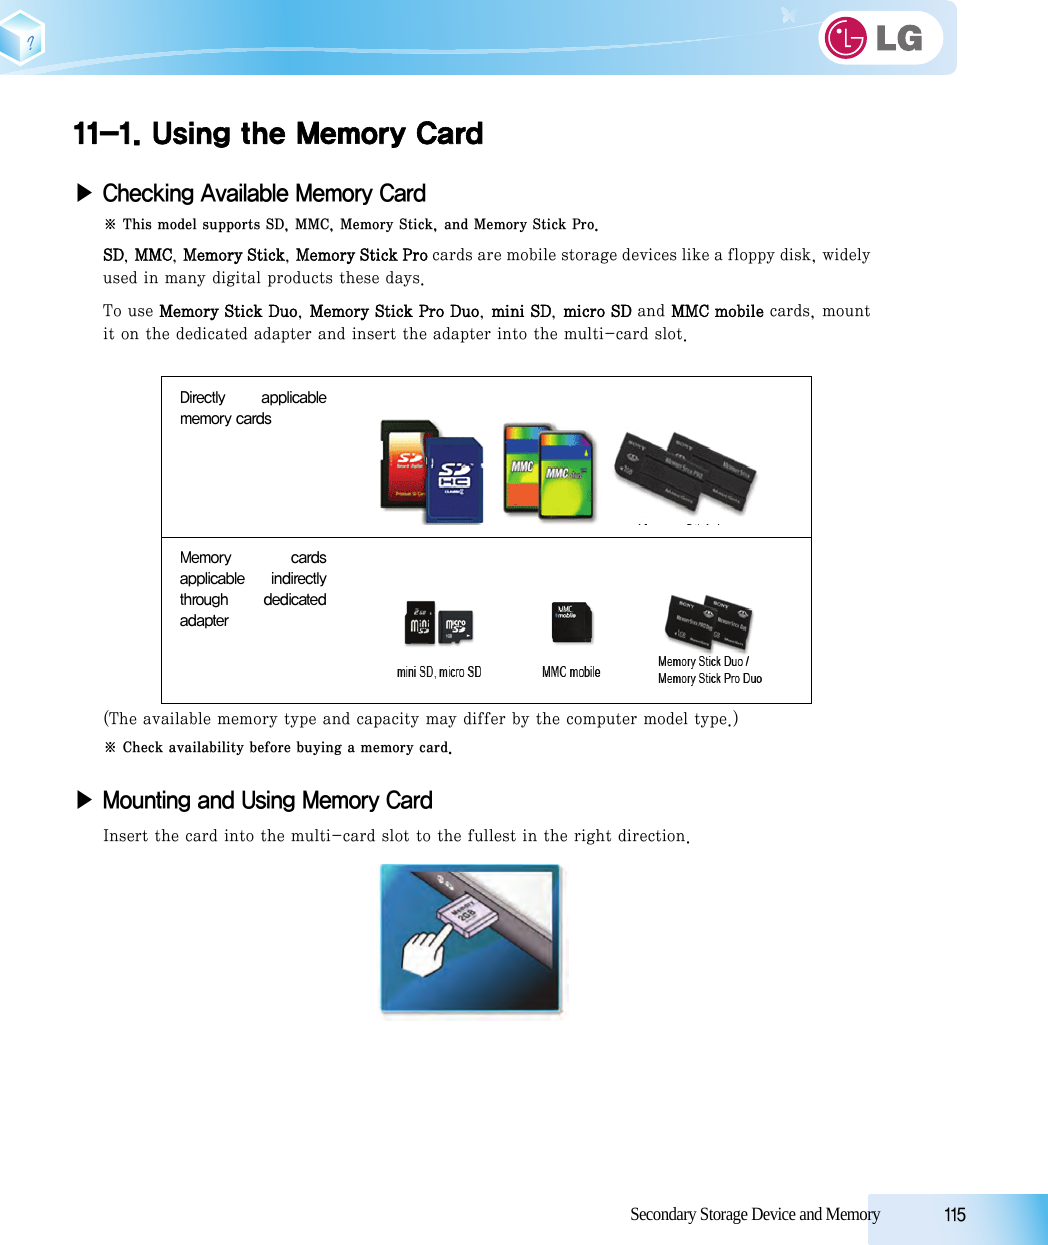 Secondary Storage Device and Memory            11511-1. Using the Memory Card▶ Checking Available Memory Card※ This model supports SD, MMC, Memory Stick, and Memory Stick Pro.SD, MMC, Memory Stick, Memory Stick Pro cards are mobile storage devices like a floppy disk, widelyused in many digital products these days. To use Memory Stick Duo, Memory Stick Pro Duo, mini SD, micro SD and MMC mobile cards, mountit on the dedicated adapter and insert the adapter into the multi-card slot.(The available memory type and capacity may differ by the computer model type.) ※ Check availability before buying a memory card.▶ Mounting and Using Memory CardInsert the card into the multi-card slot to the fullest in the right direction.Directly  applicablememory cardsMemory  cardsapplicable  indirectlythrough  dedicatedadapter